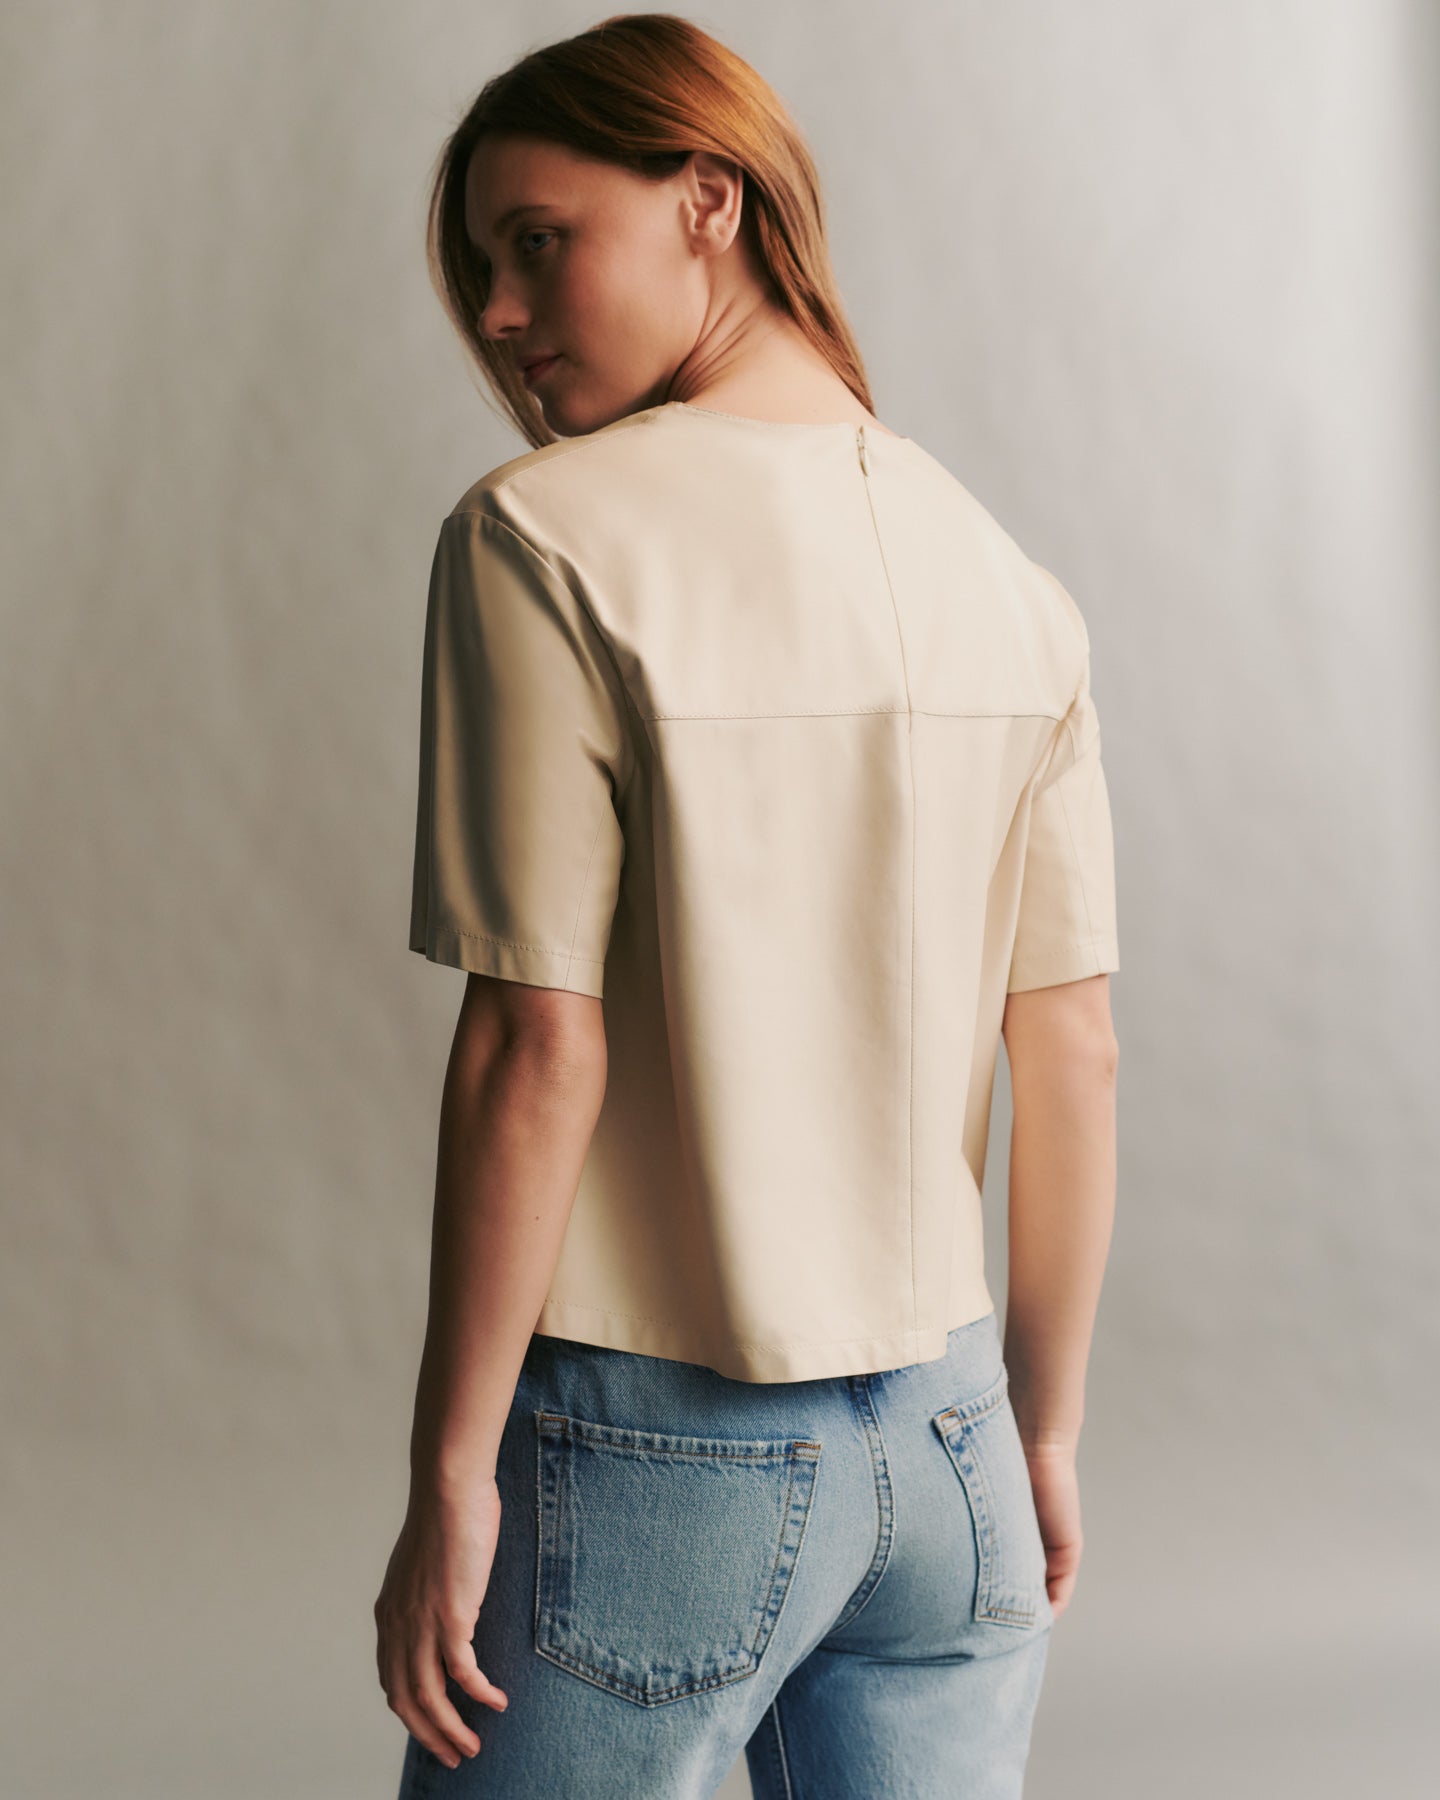 TWP Creama Cate top in paper suede view 3